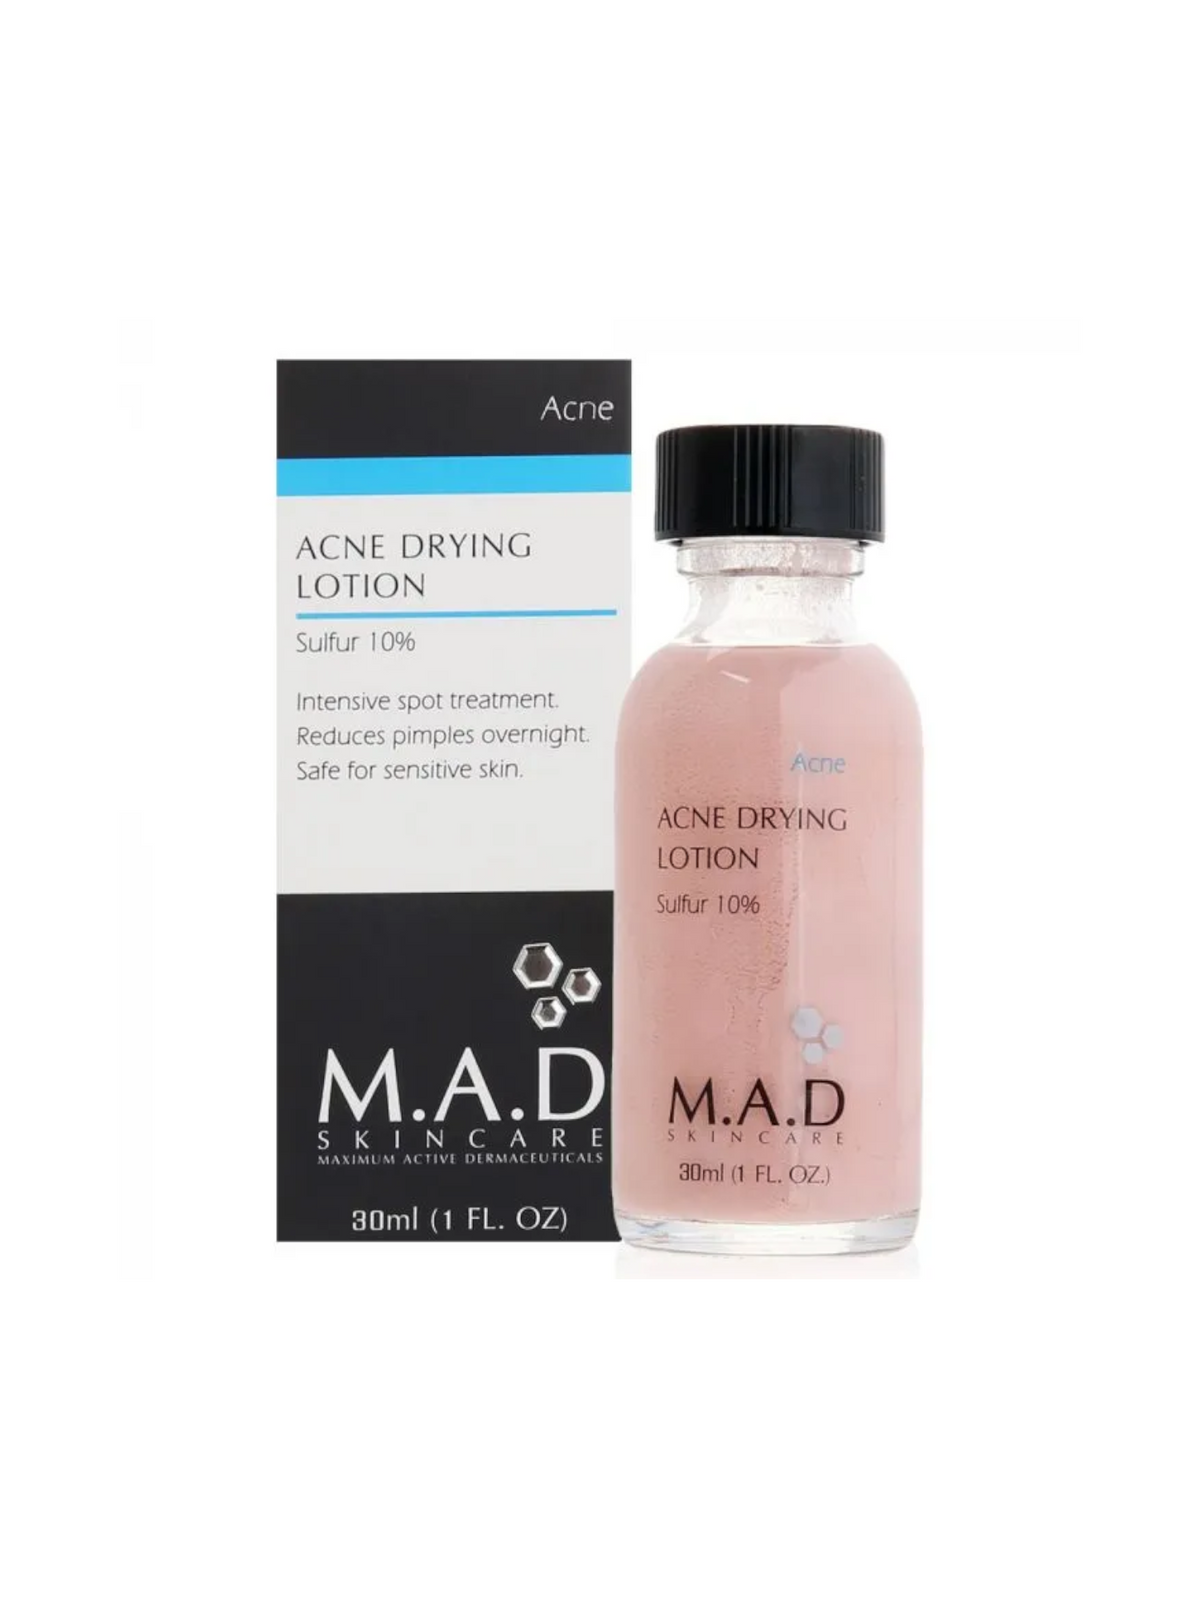 Acne Drying Lotion Sulfur 10%